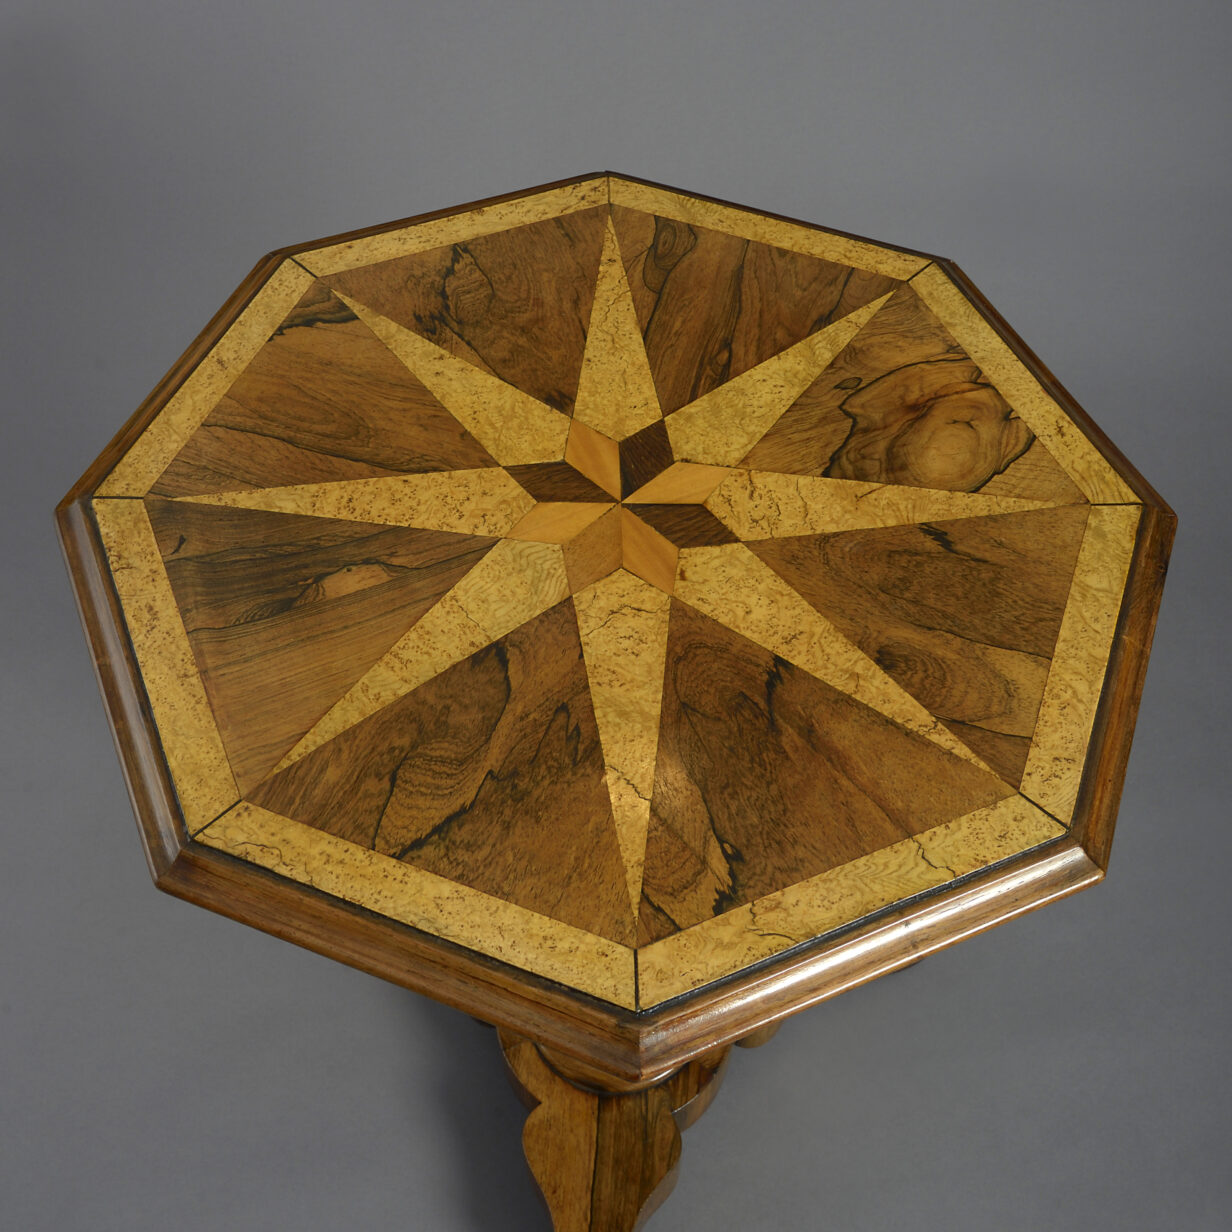 19th century parquetry occasional table